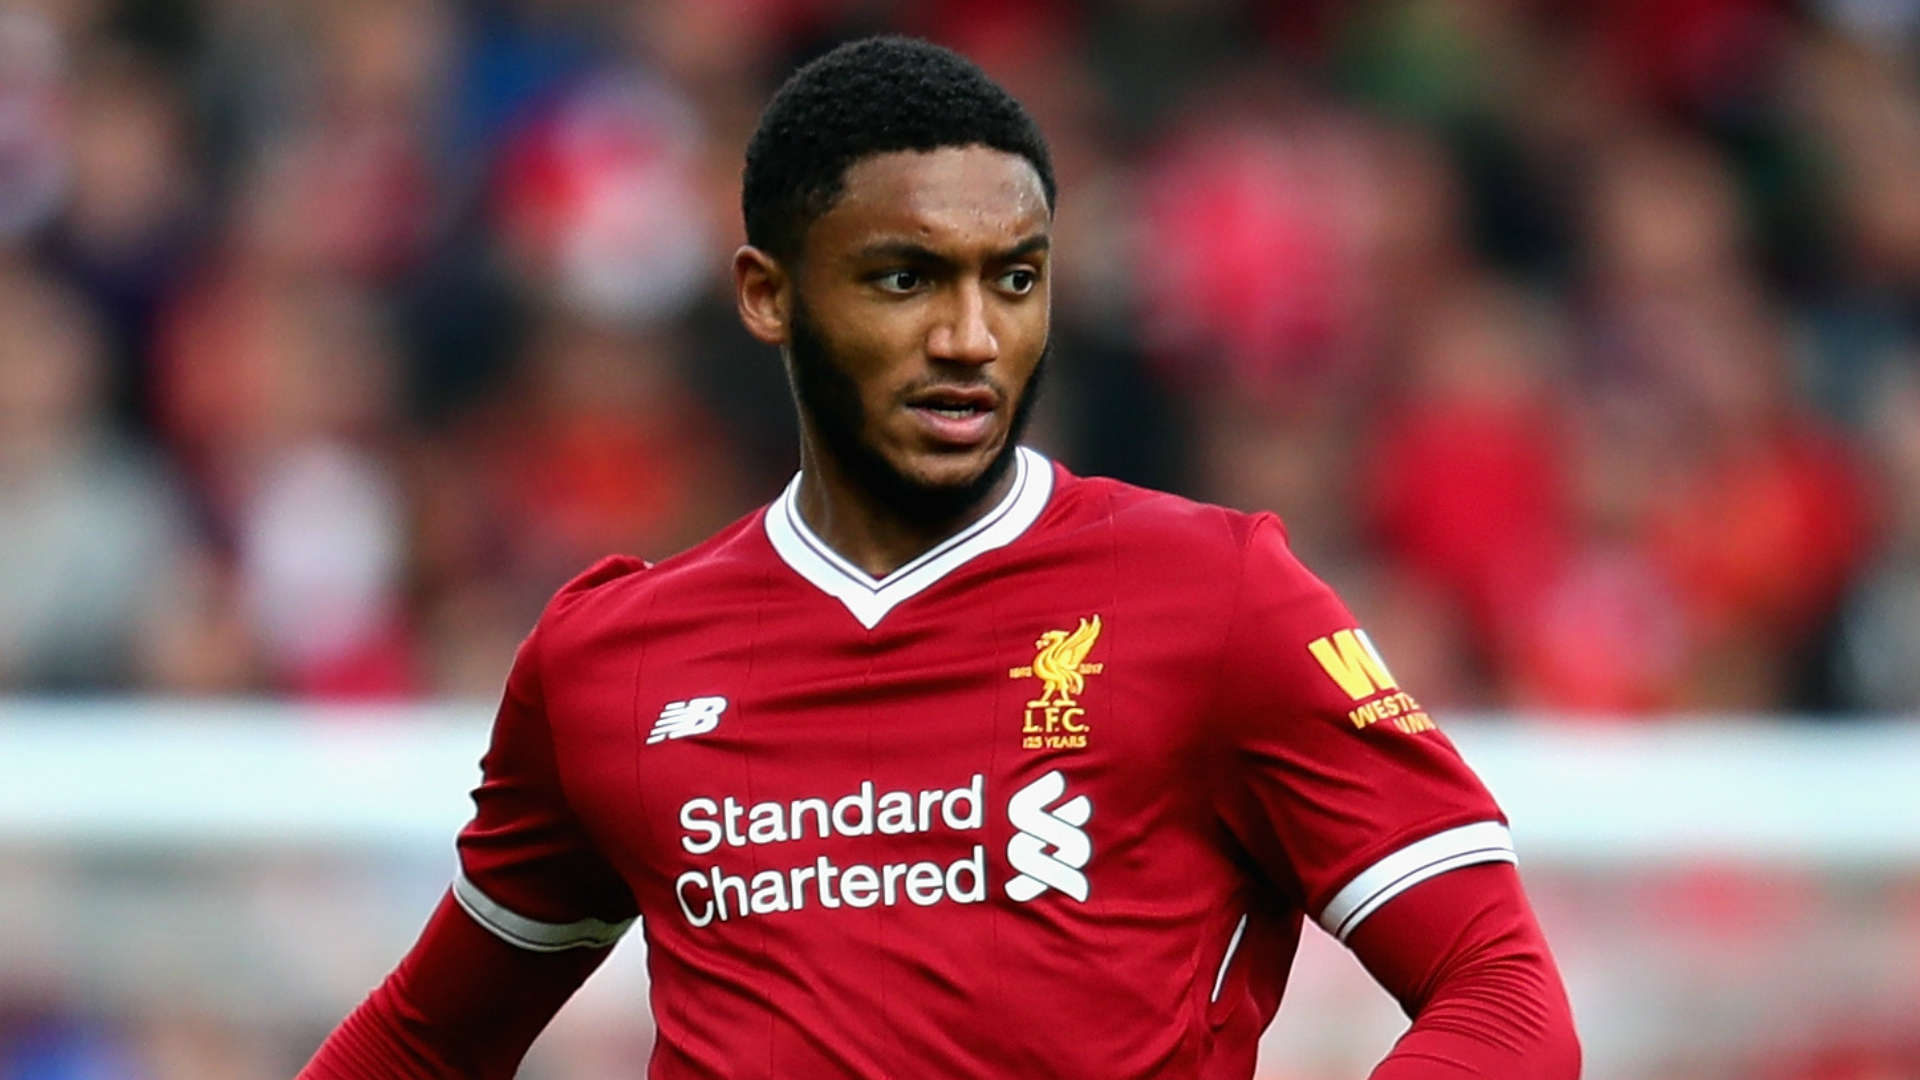 Liverpool's Joe Gomez revealed his determination to be back as soon as possible in a short video the club posted on Twitter.